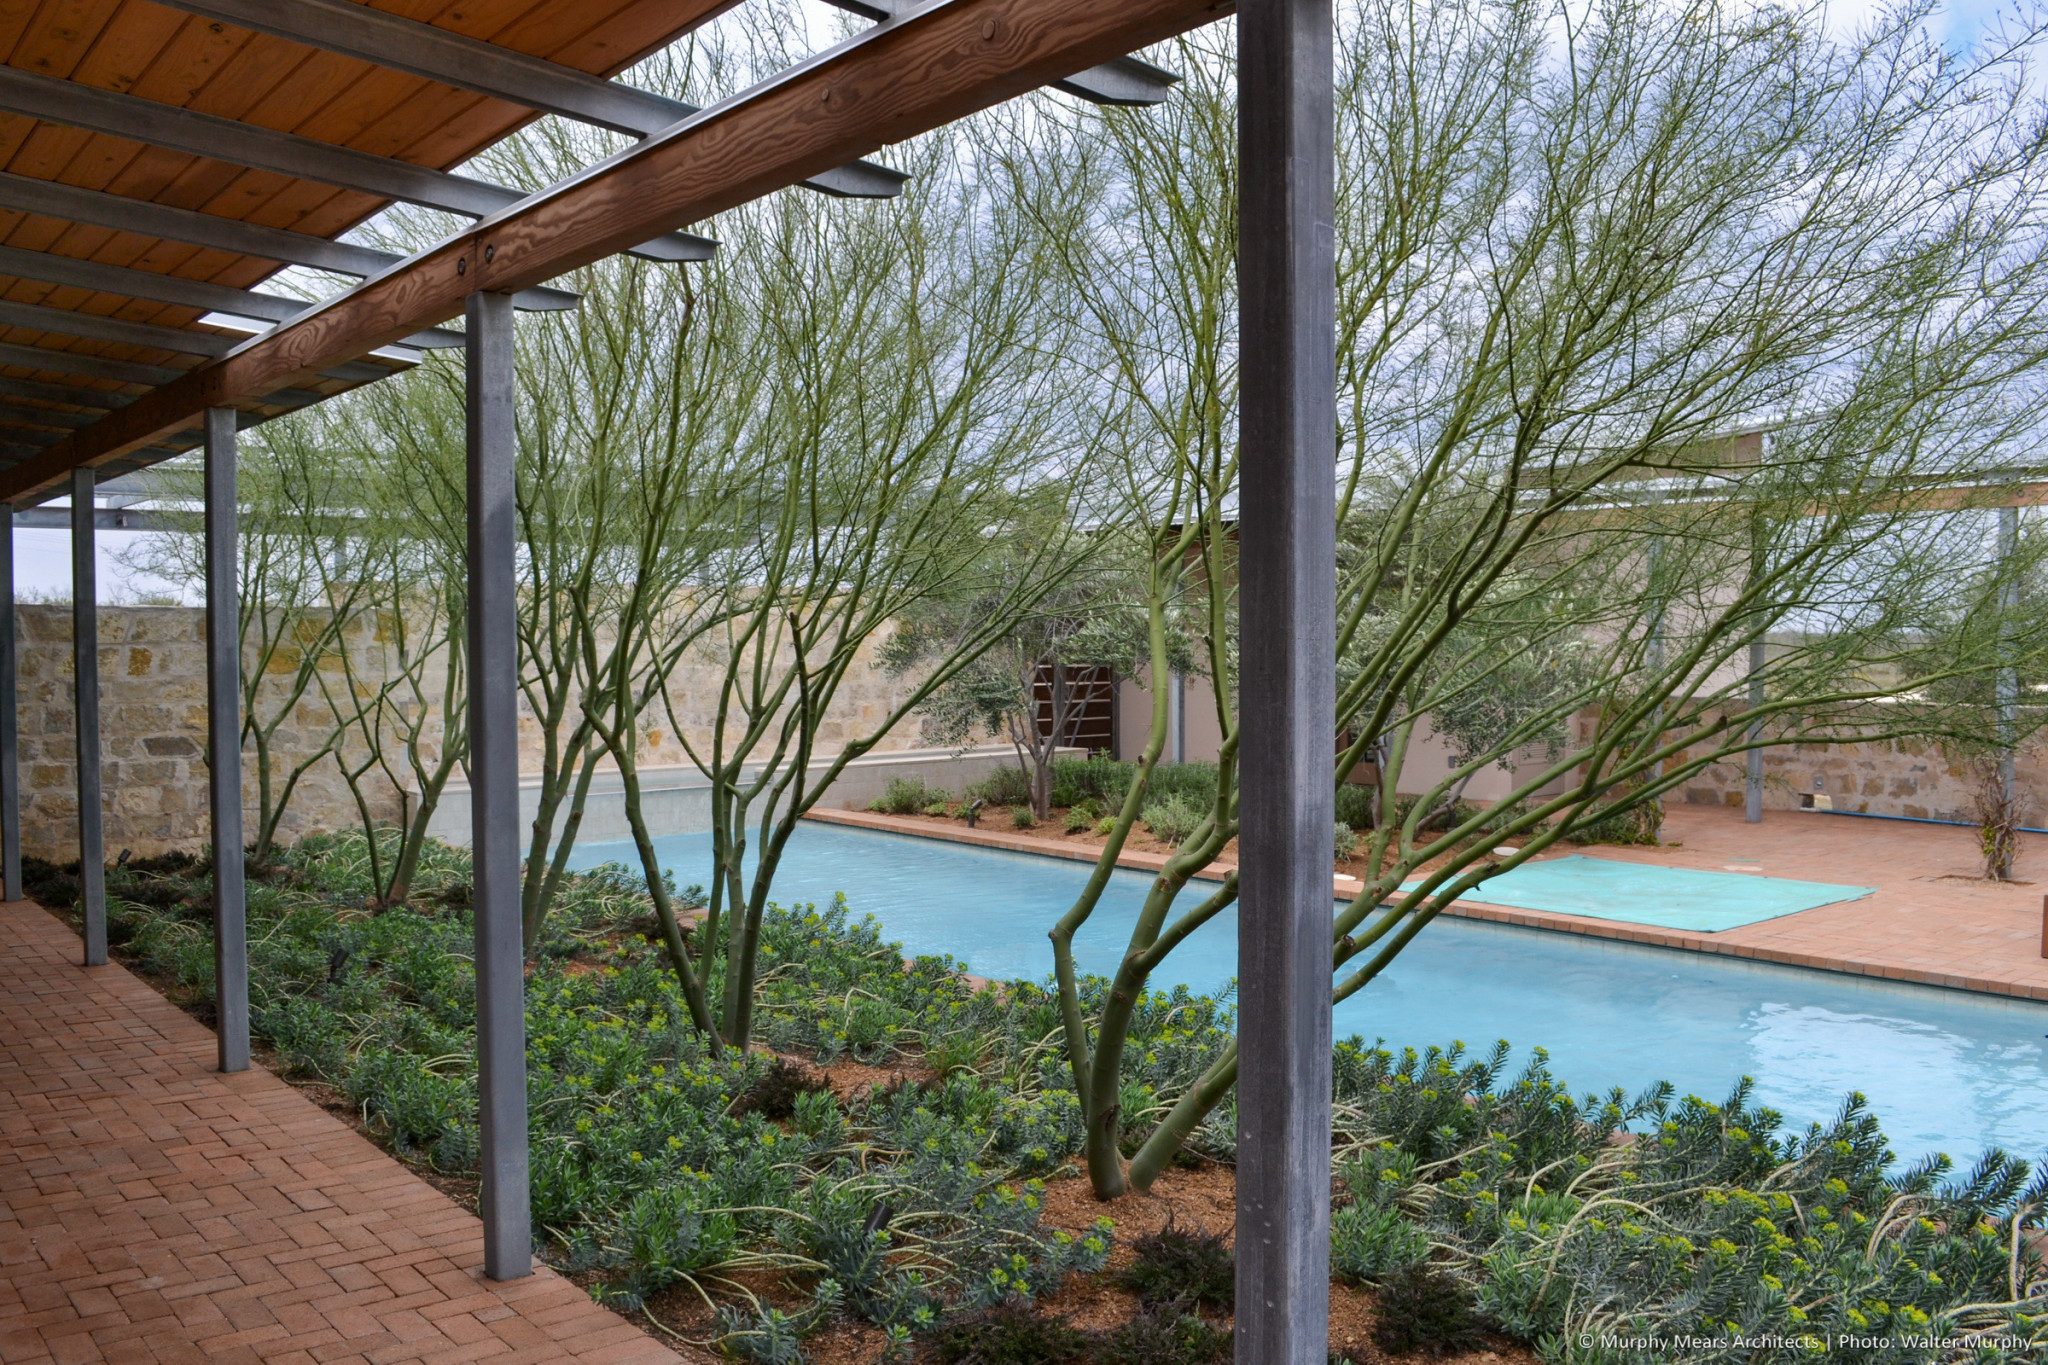 inner courtyard pool surrounded by brick paver terrace with palo verde trees in desert landscaping